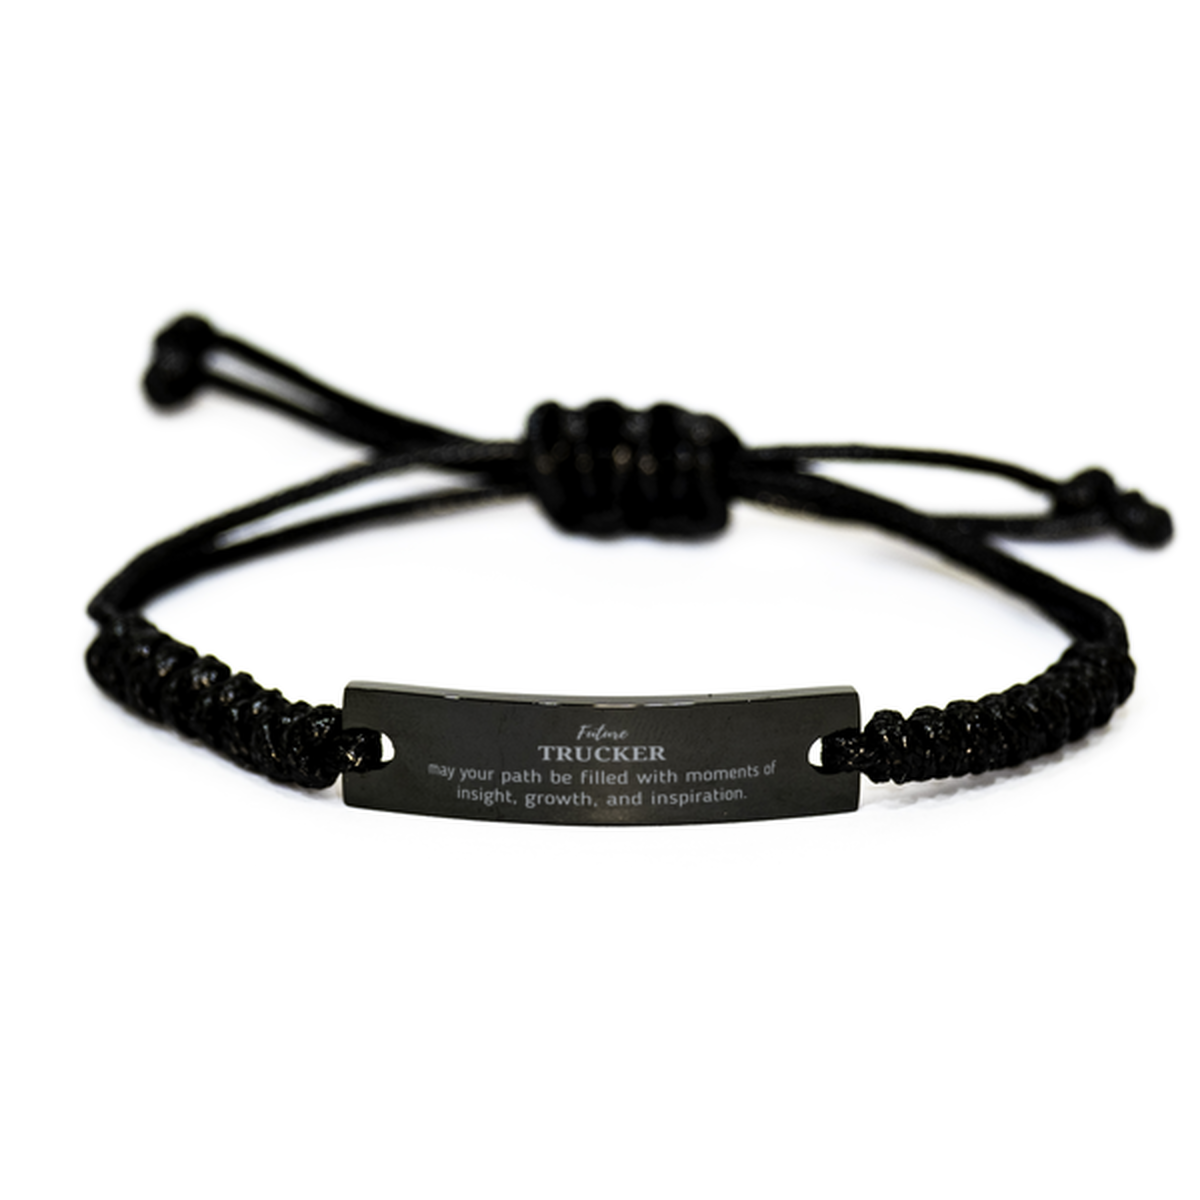 Future Trucker Gifts, May your path be filled with moments of insight, Graduation Gifts for New Trucker, Christmas Unique Black Rope Bracelet For Men, Women, Friends